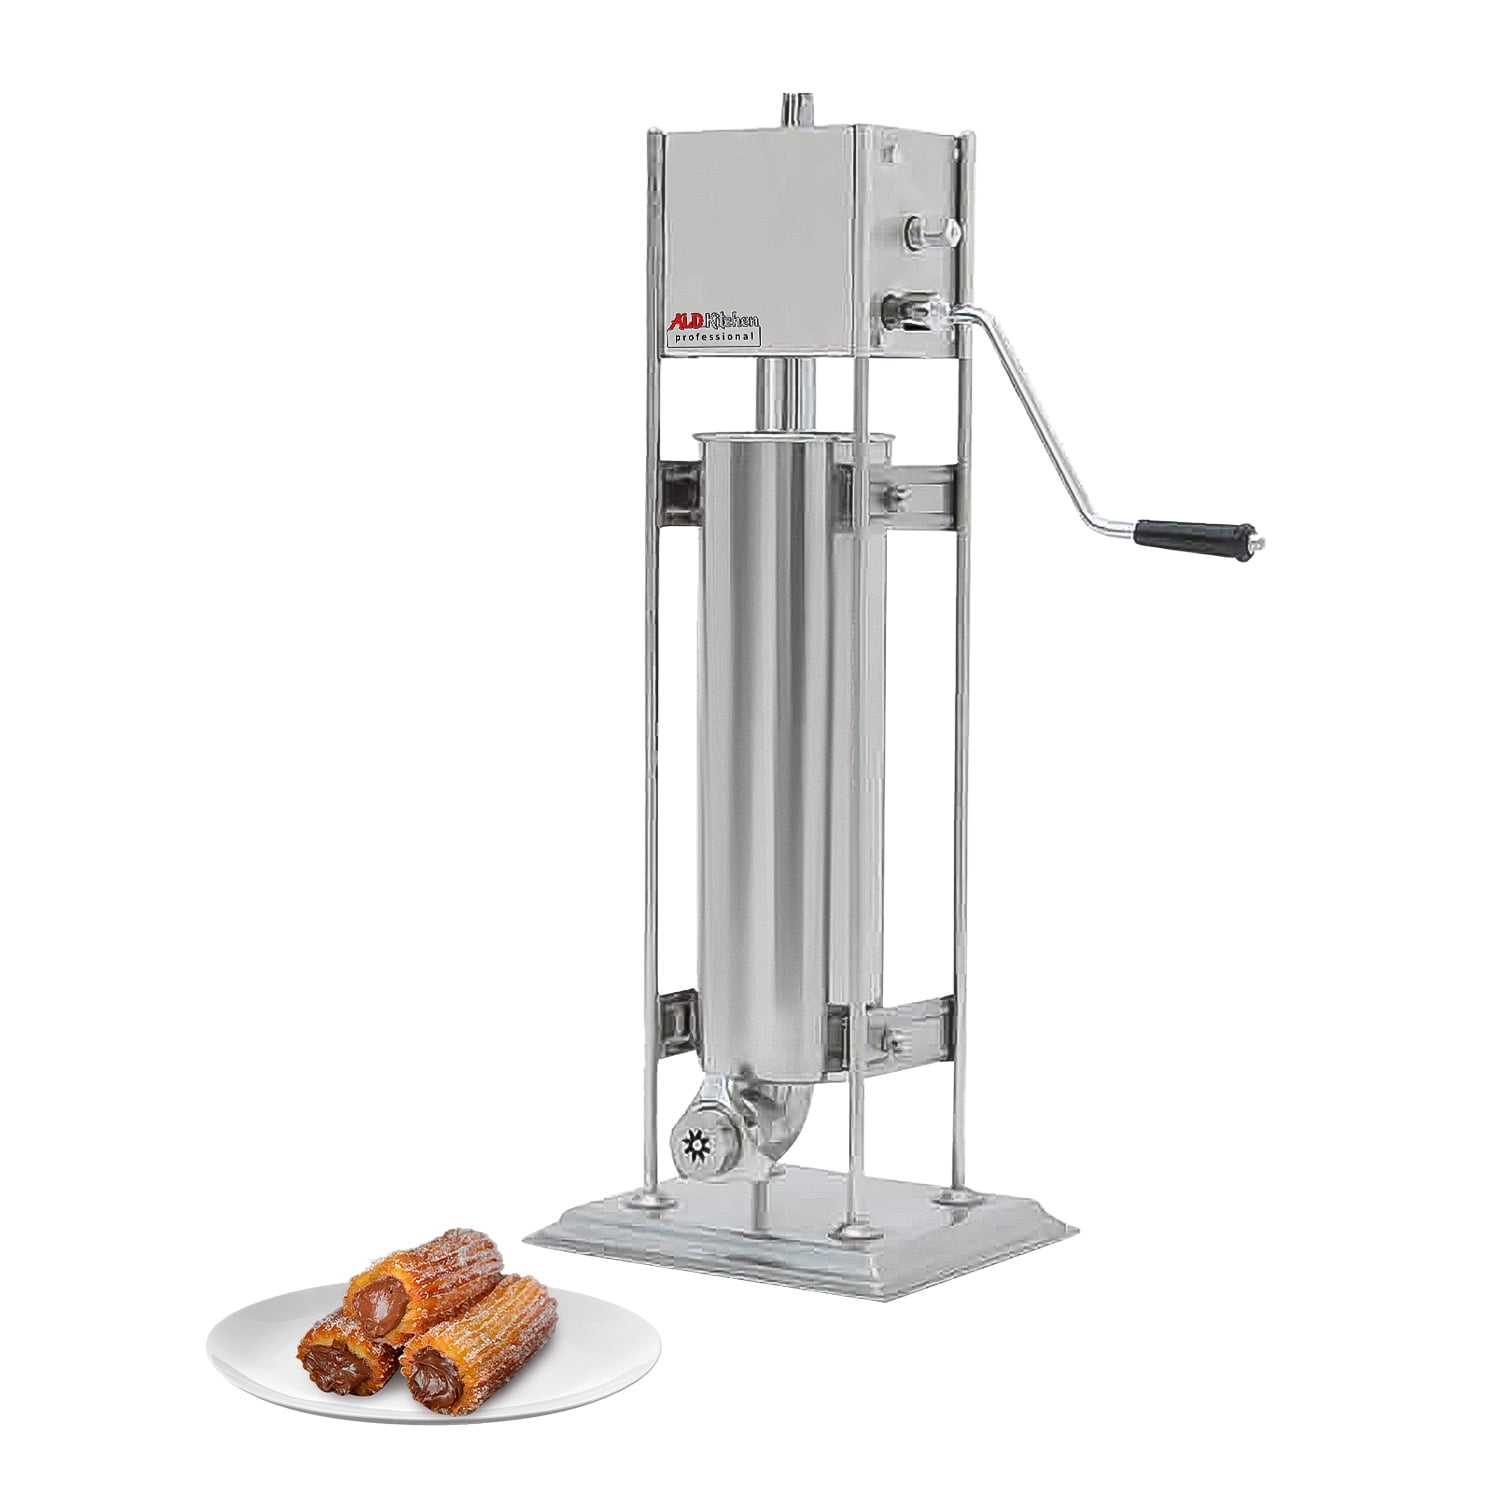 Details about   5L Commercial Stainless Steel Manual Spanish Churro Maker Machine Brand New Sale 